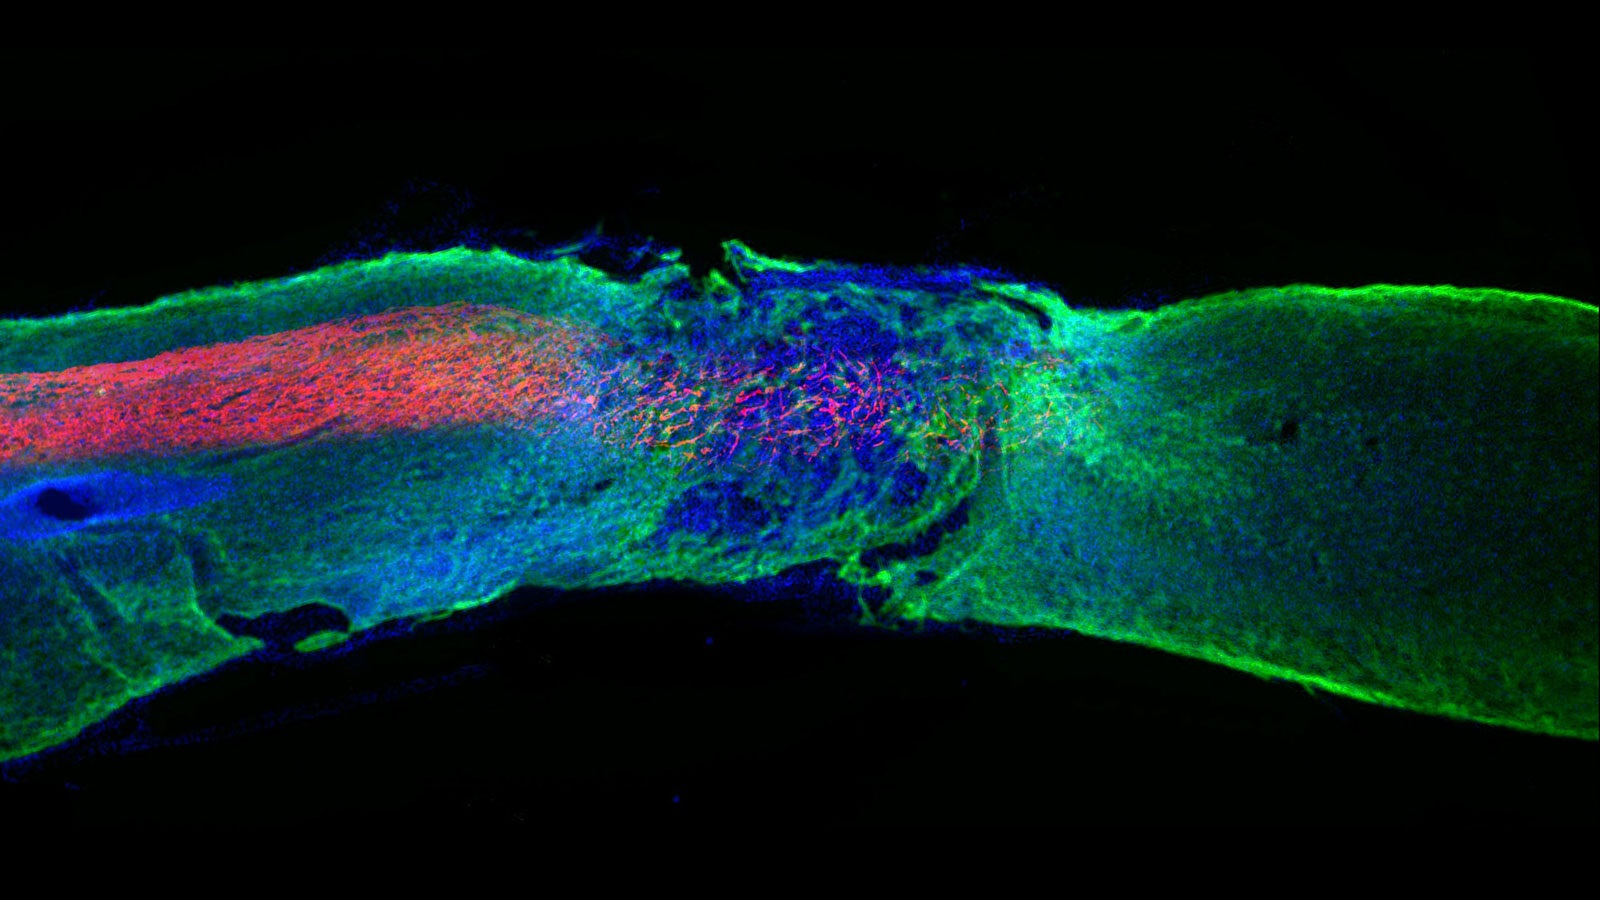 Axons (red) regenerated within a damaged area of the spinal cord after being treated with a new therapy developed by Northwestern researchers with the help of the Advanced Photon source at Argonne National Laboratory. (Image by Samuel I. Stupp Laboratory/Northwestern University.)